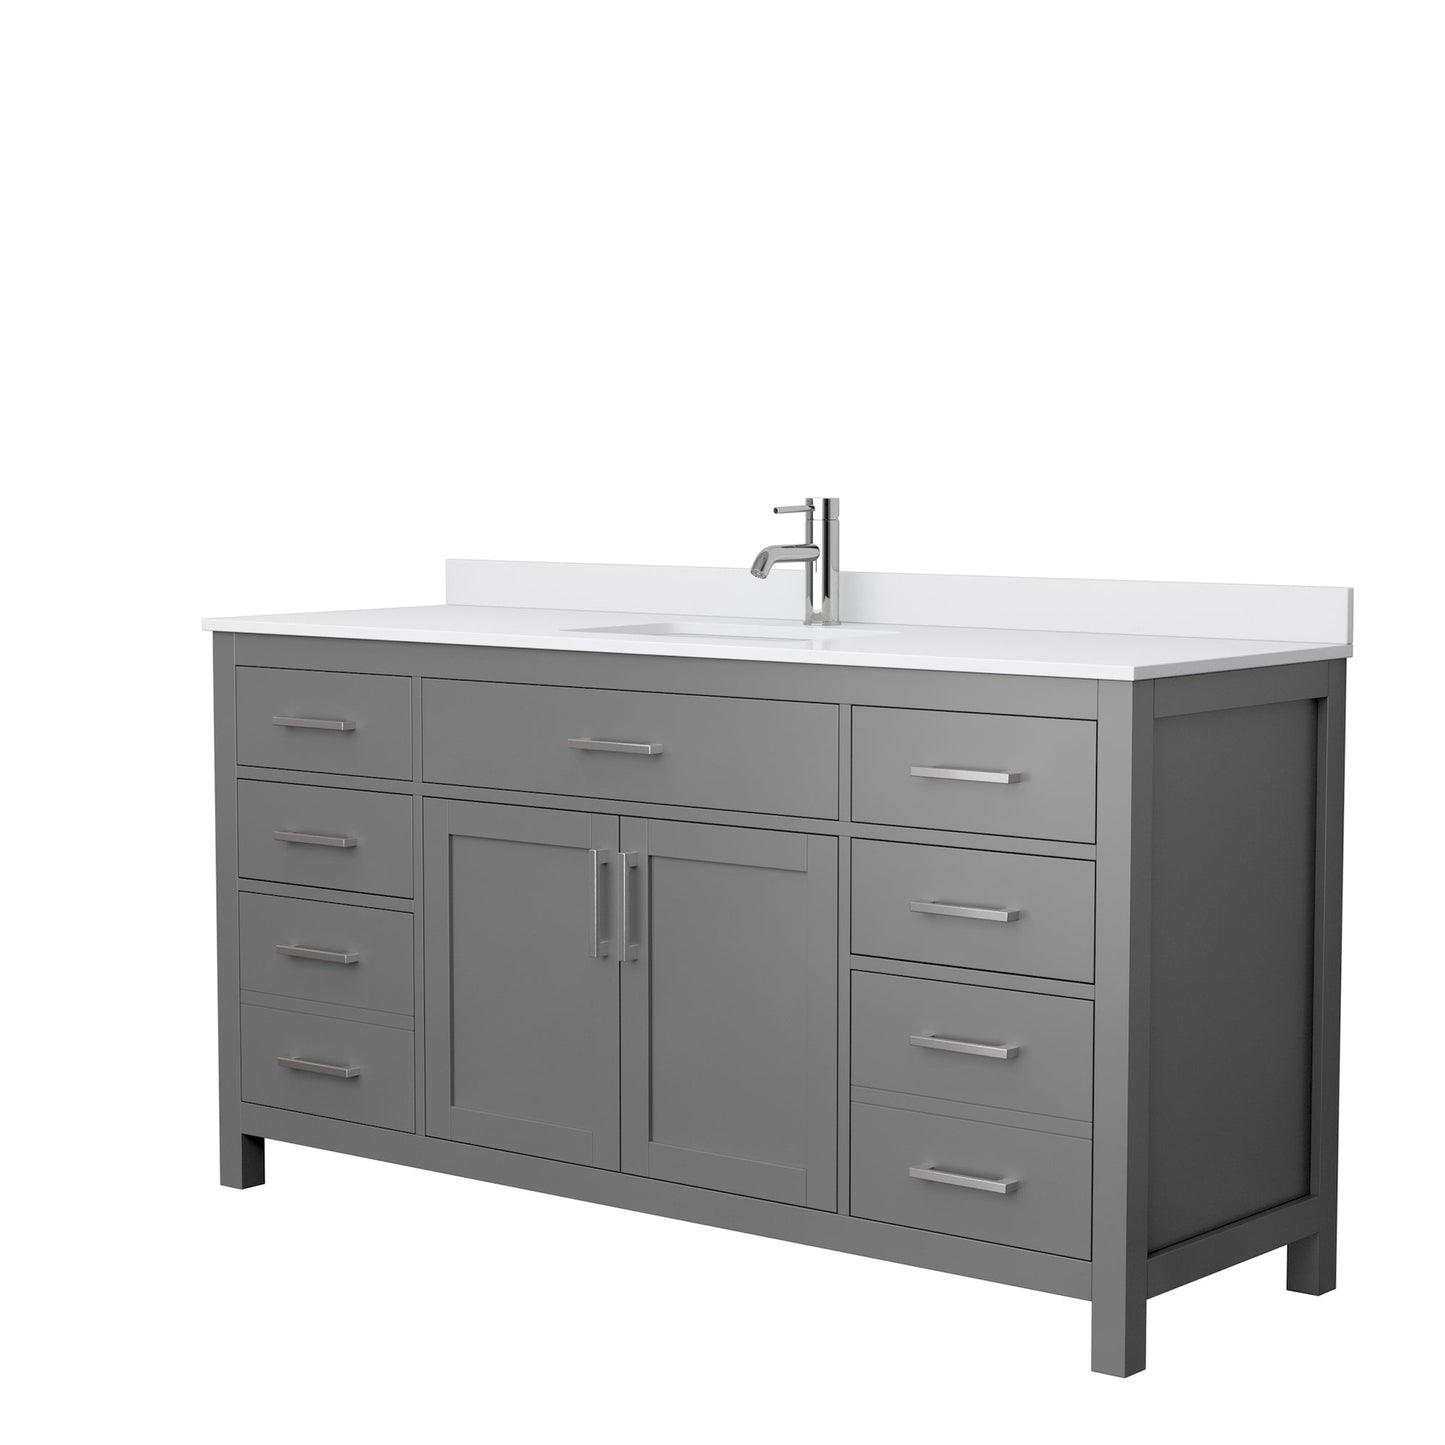 Wyndham Collection Beckett 66" Single Bathroom Dark Gray Vanity With White Cultured Marble Countertop, Undermount Square Sink And Brushed Nickel Trim